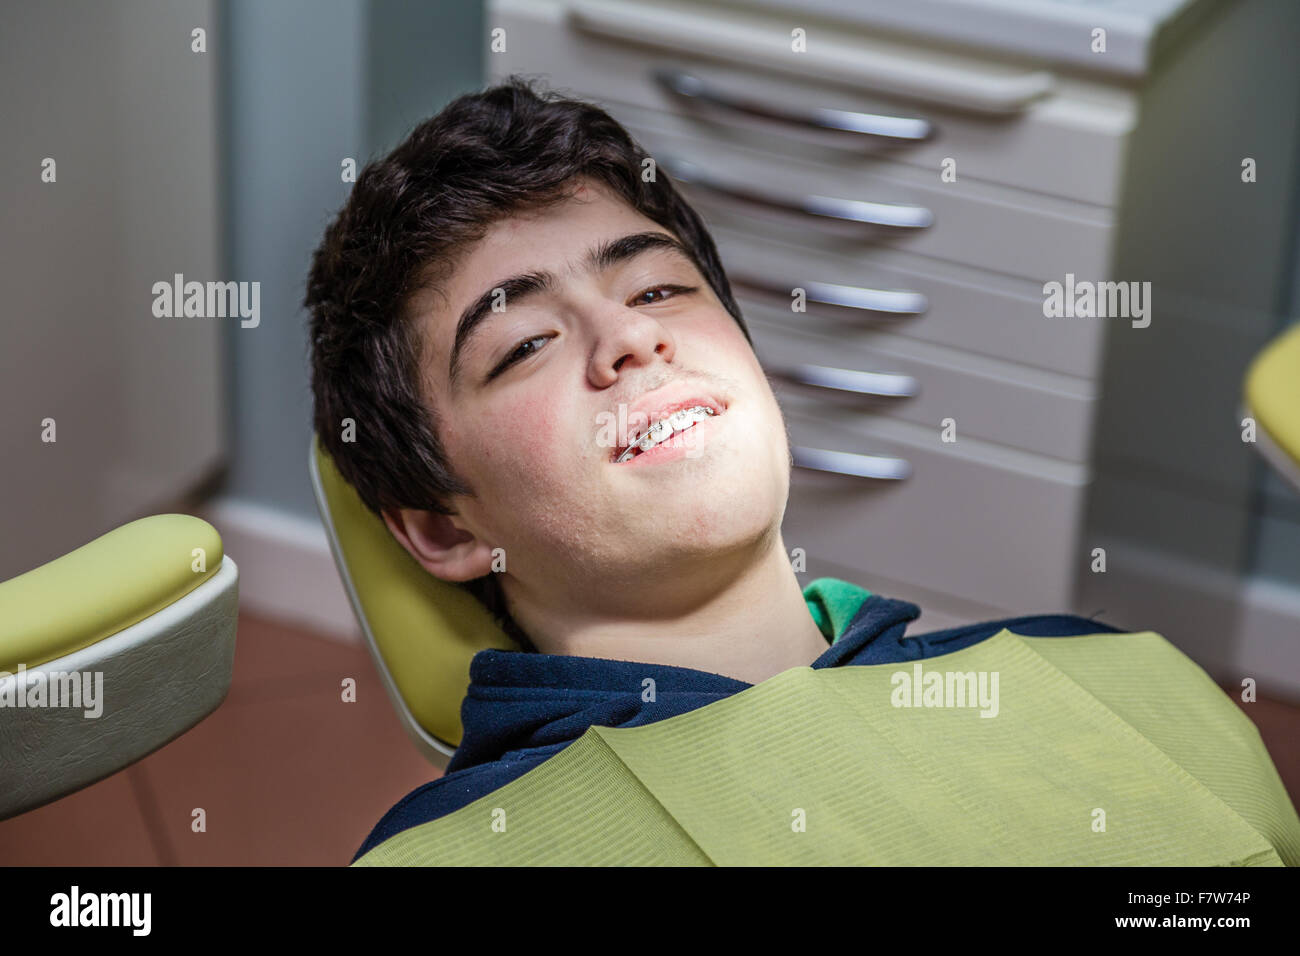 Caucasian teenager with acne skin lying on the dentist chair is smiling showing braces Stock Photo